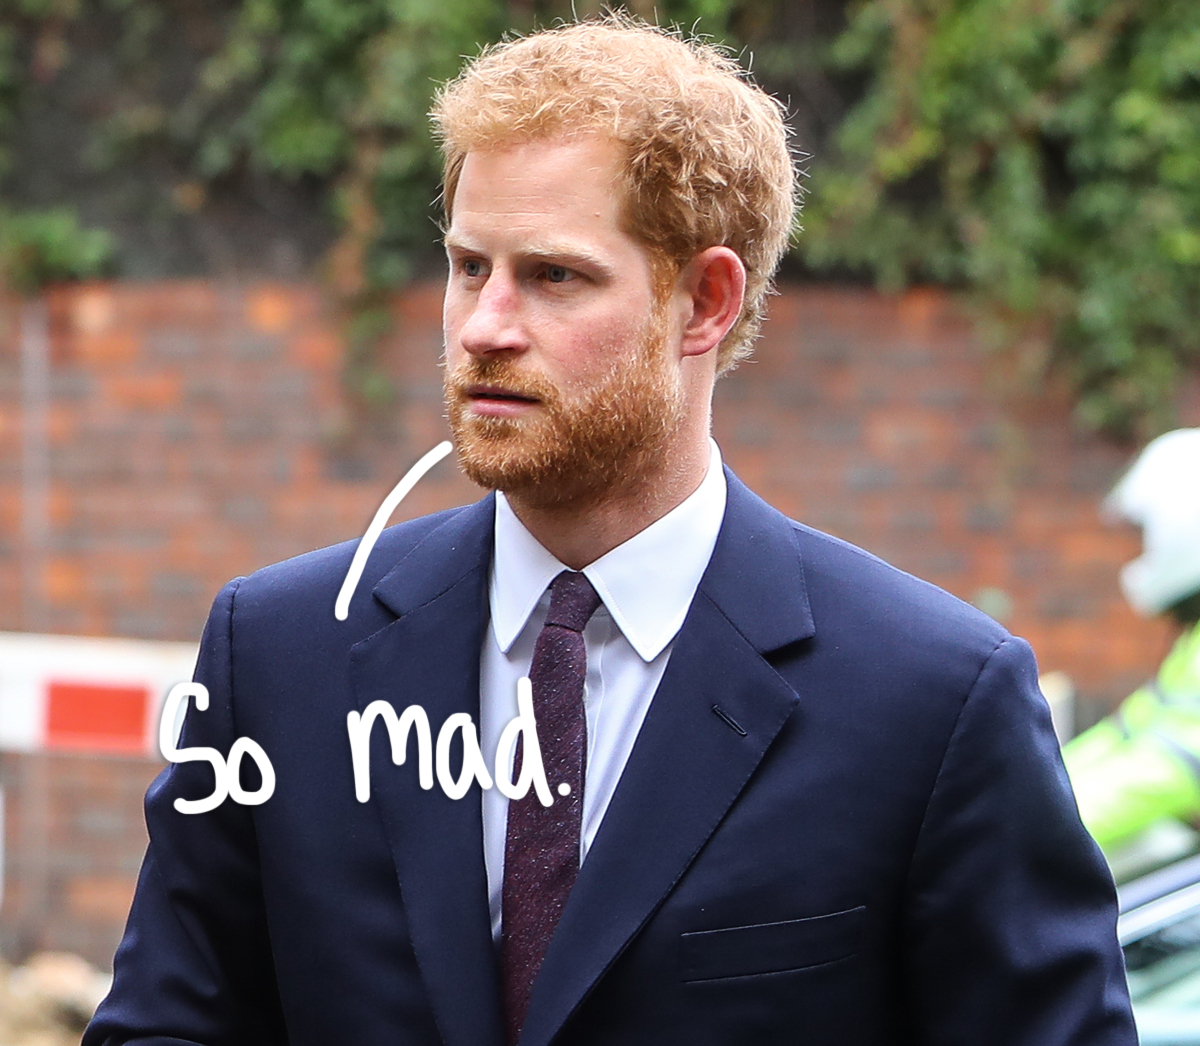 #Prince Harry Is ‘Heartbroken’ After Being Stripped Of Queen’s Initials On His Military Uniform During Vigil